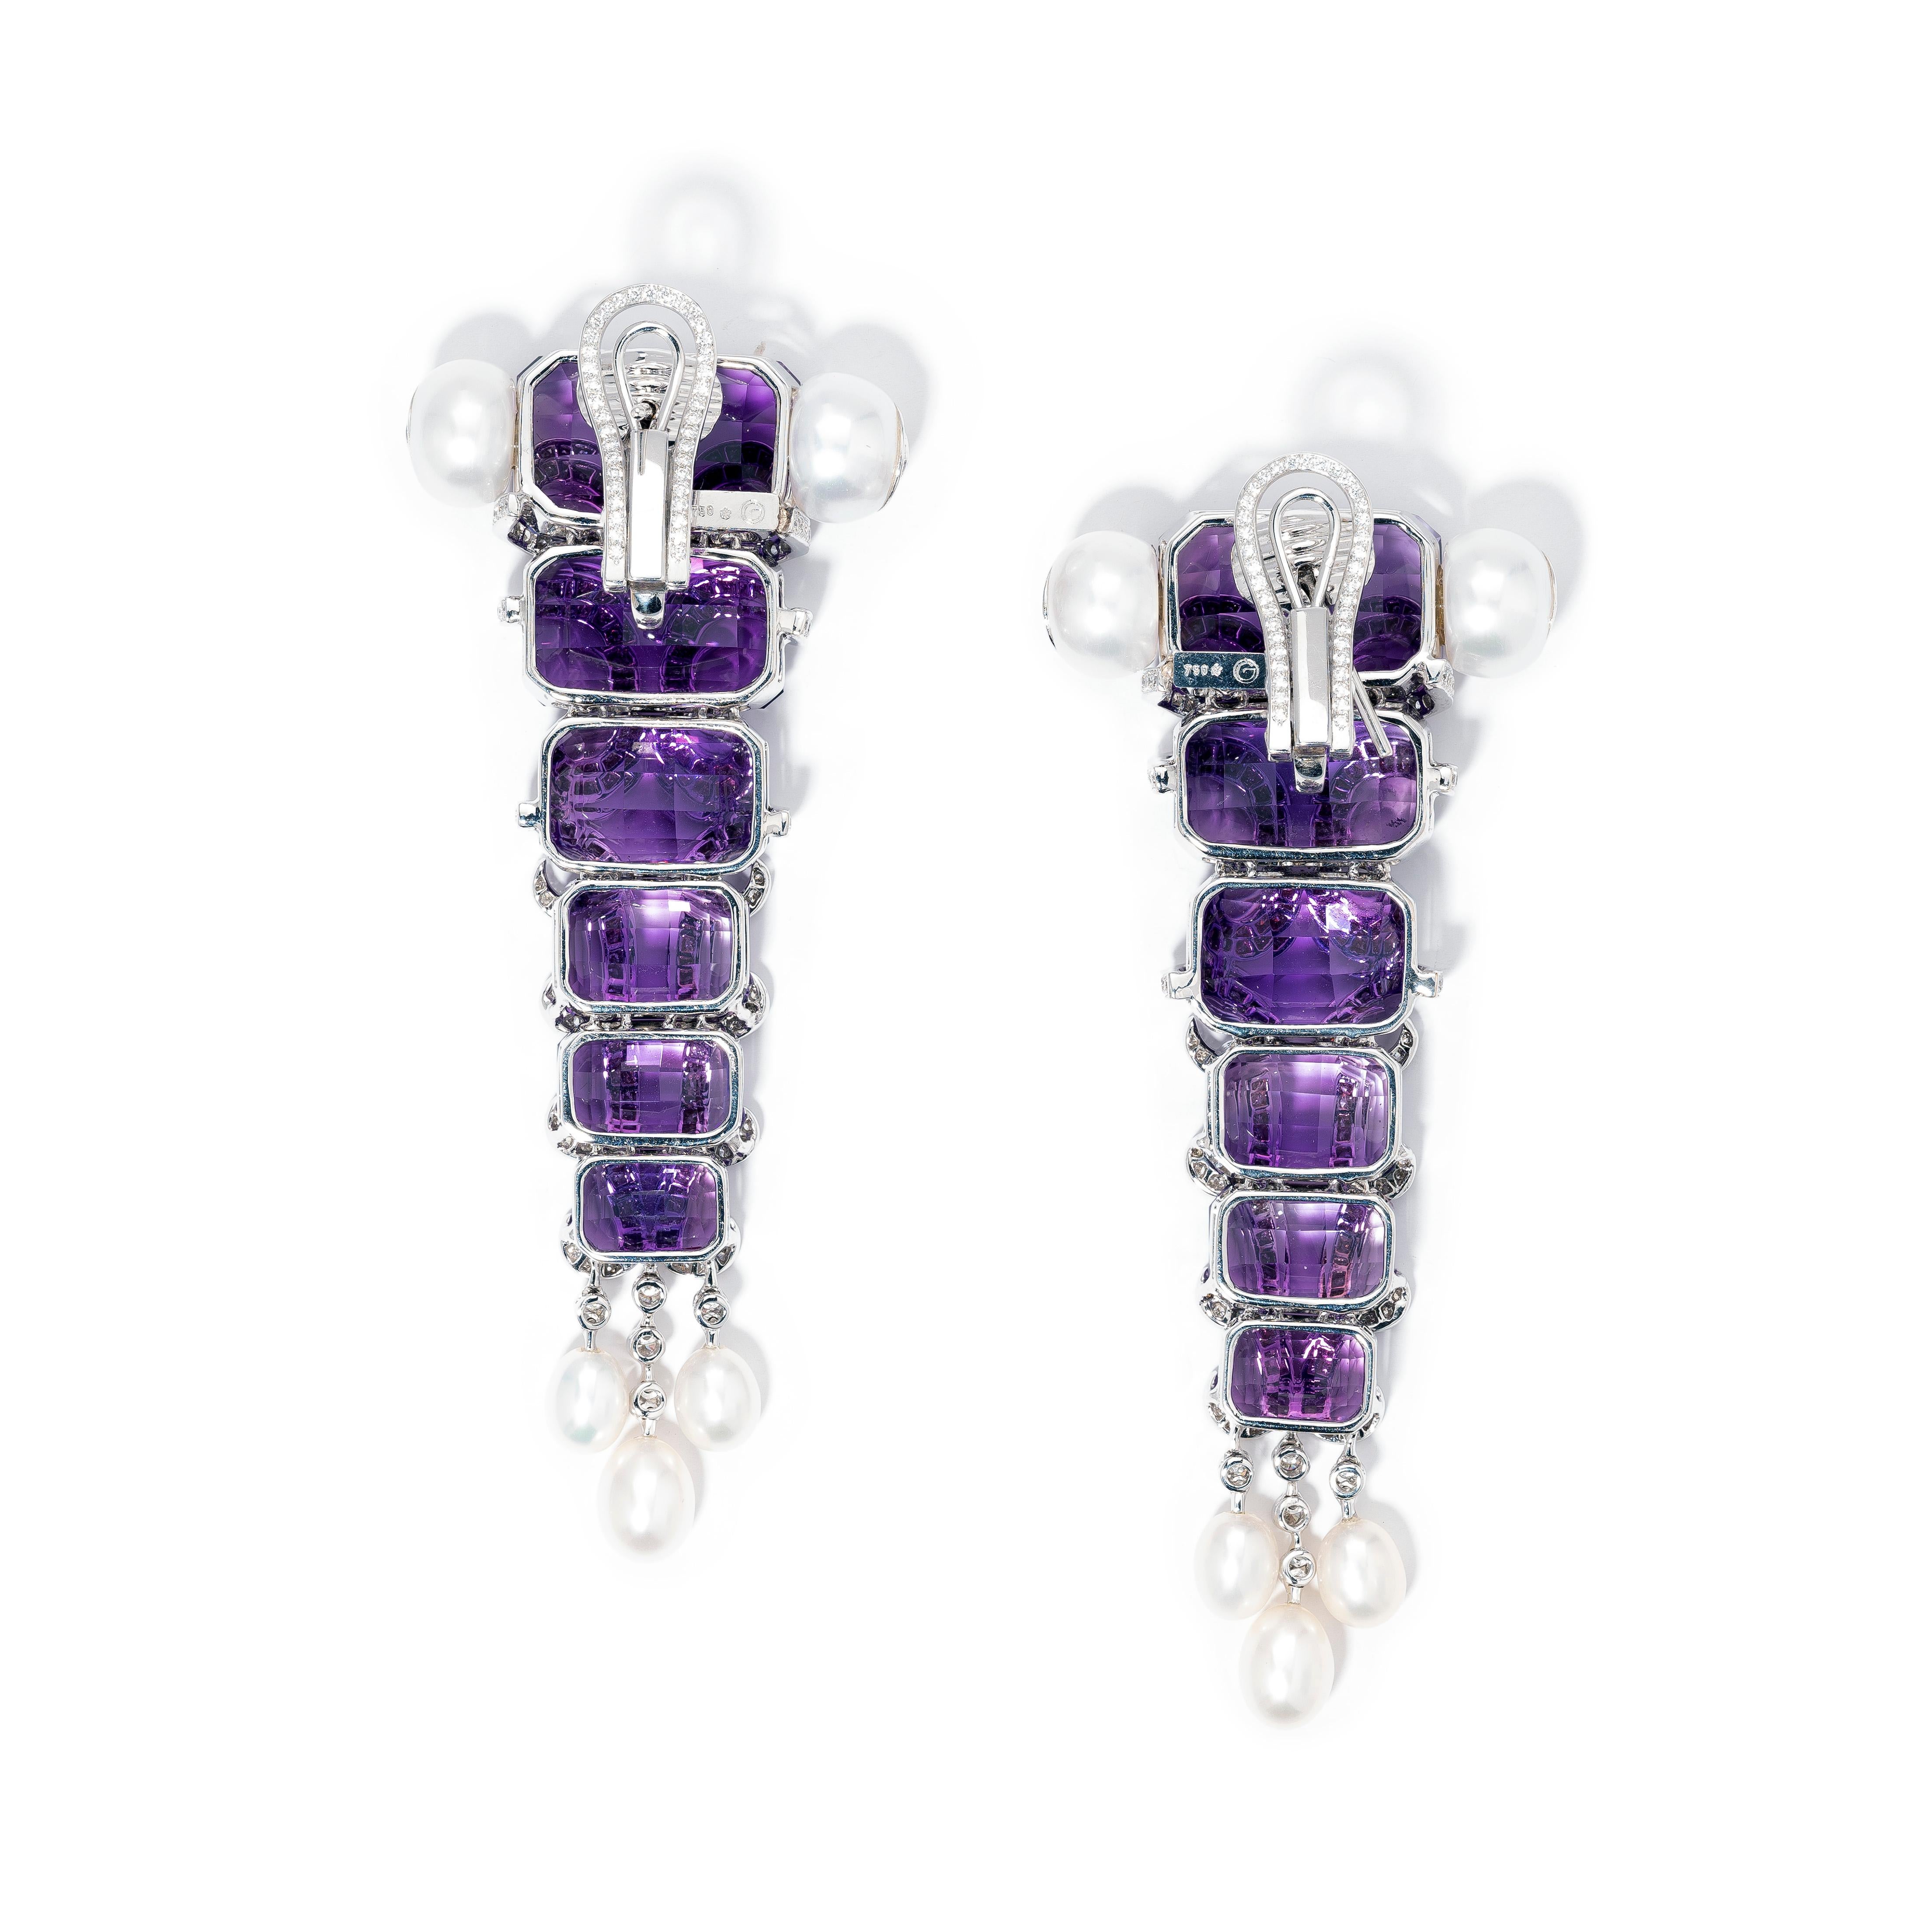 A unique pair of handmade abstract ear clips in 18K white gold set with:
12 Step cut amethyst weighing 60.36cts
4 Circular cut amethysts weighing 0.36cts
4 Button shaped cultured pearls weighing 20.00cts
6 Cultured pearls drops weighing 6.94cts
10